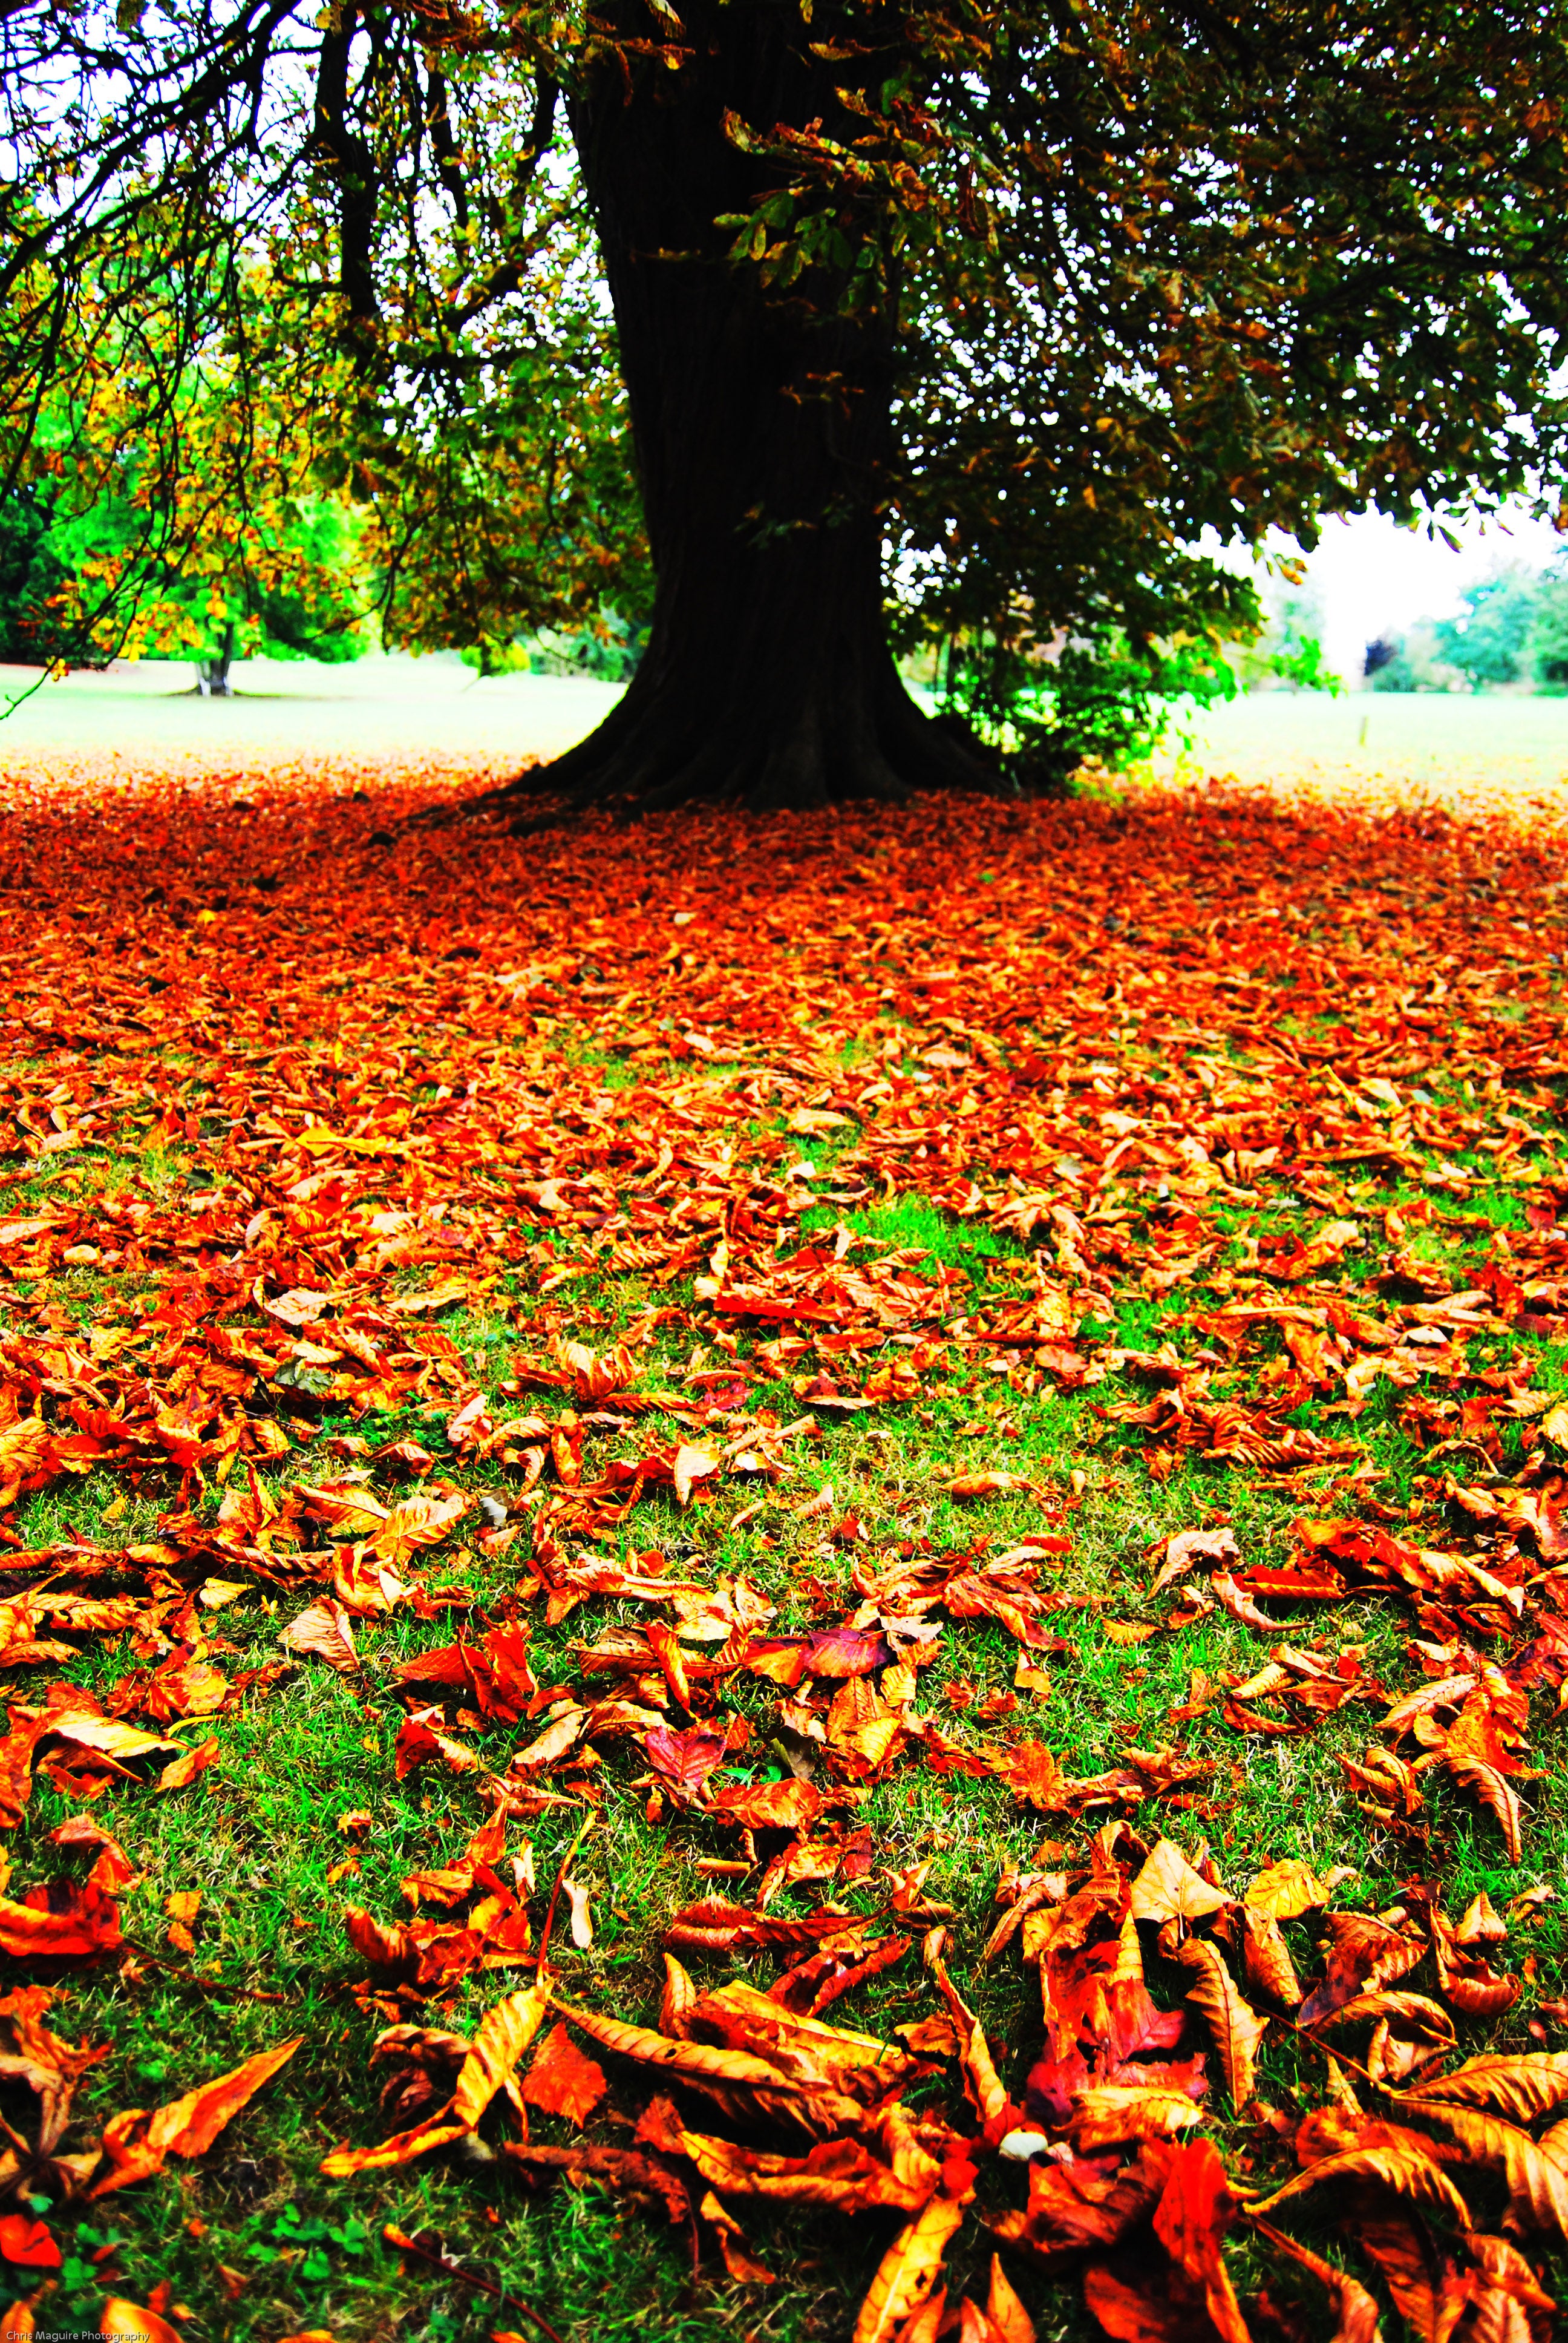 Fallen leaves have been a common sight all over the UK this summer (Terry Whittaker/ Devon Wildlife Trust)